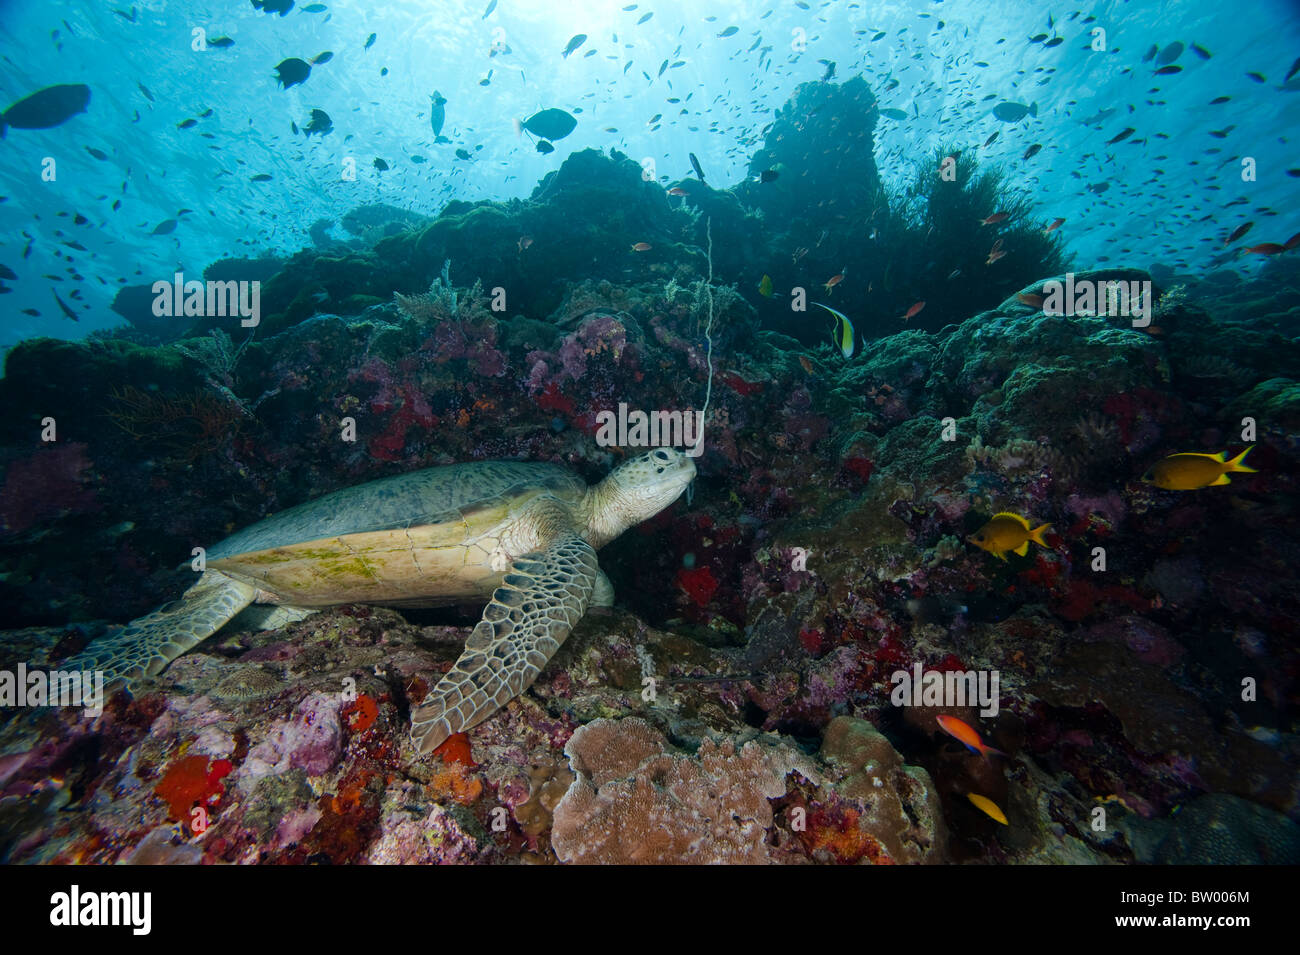 A Green Turtle, Chelonia mydas, resting on ledge at coral reef, surrounded by reef fishes, profile, Sipadan, Sabah, Malaysia Stock Photo